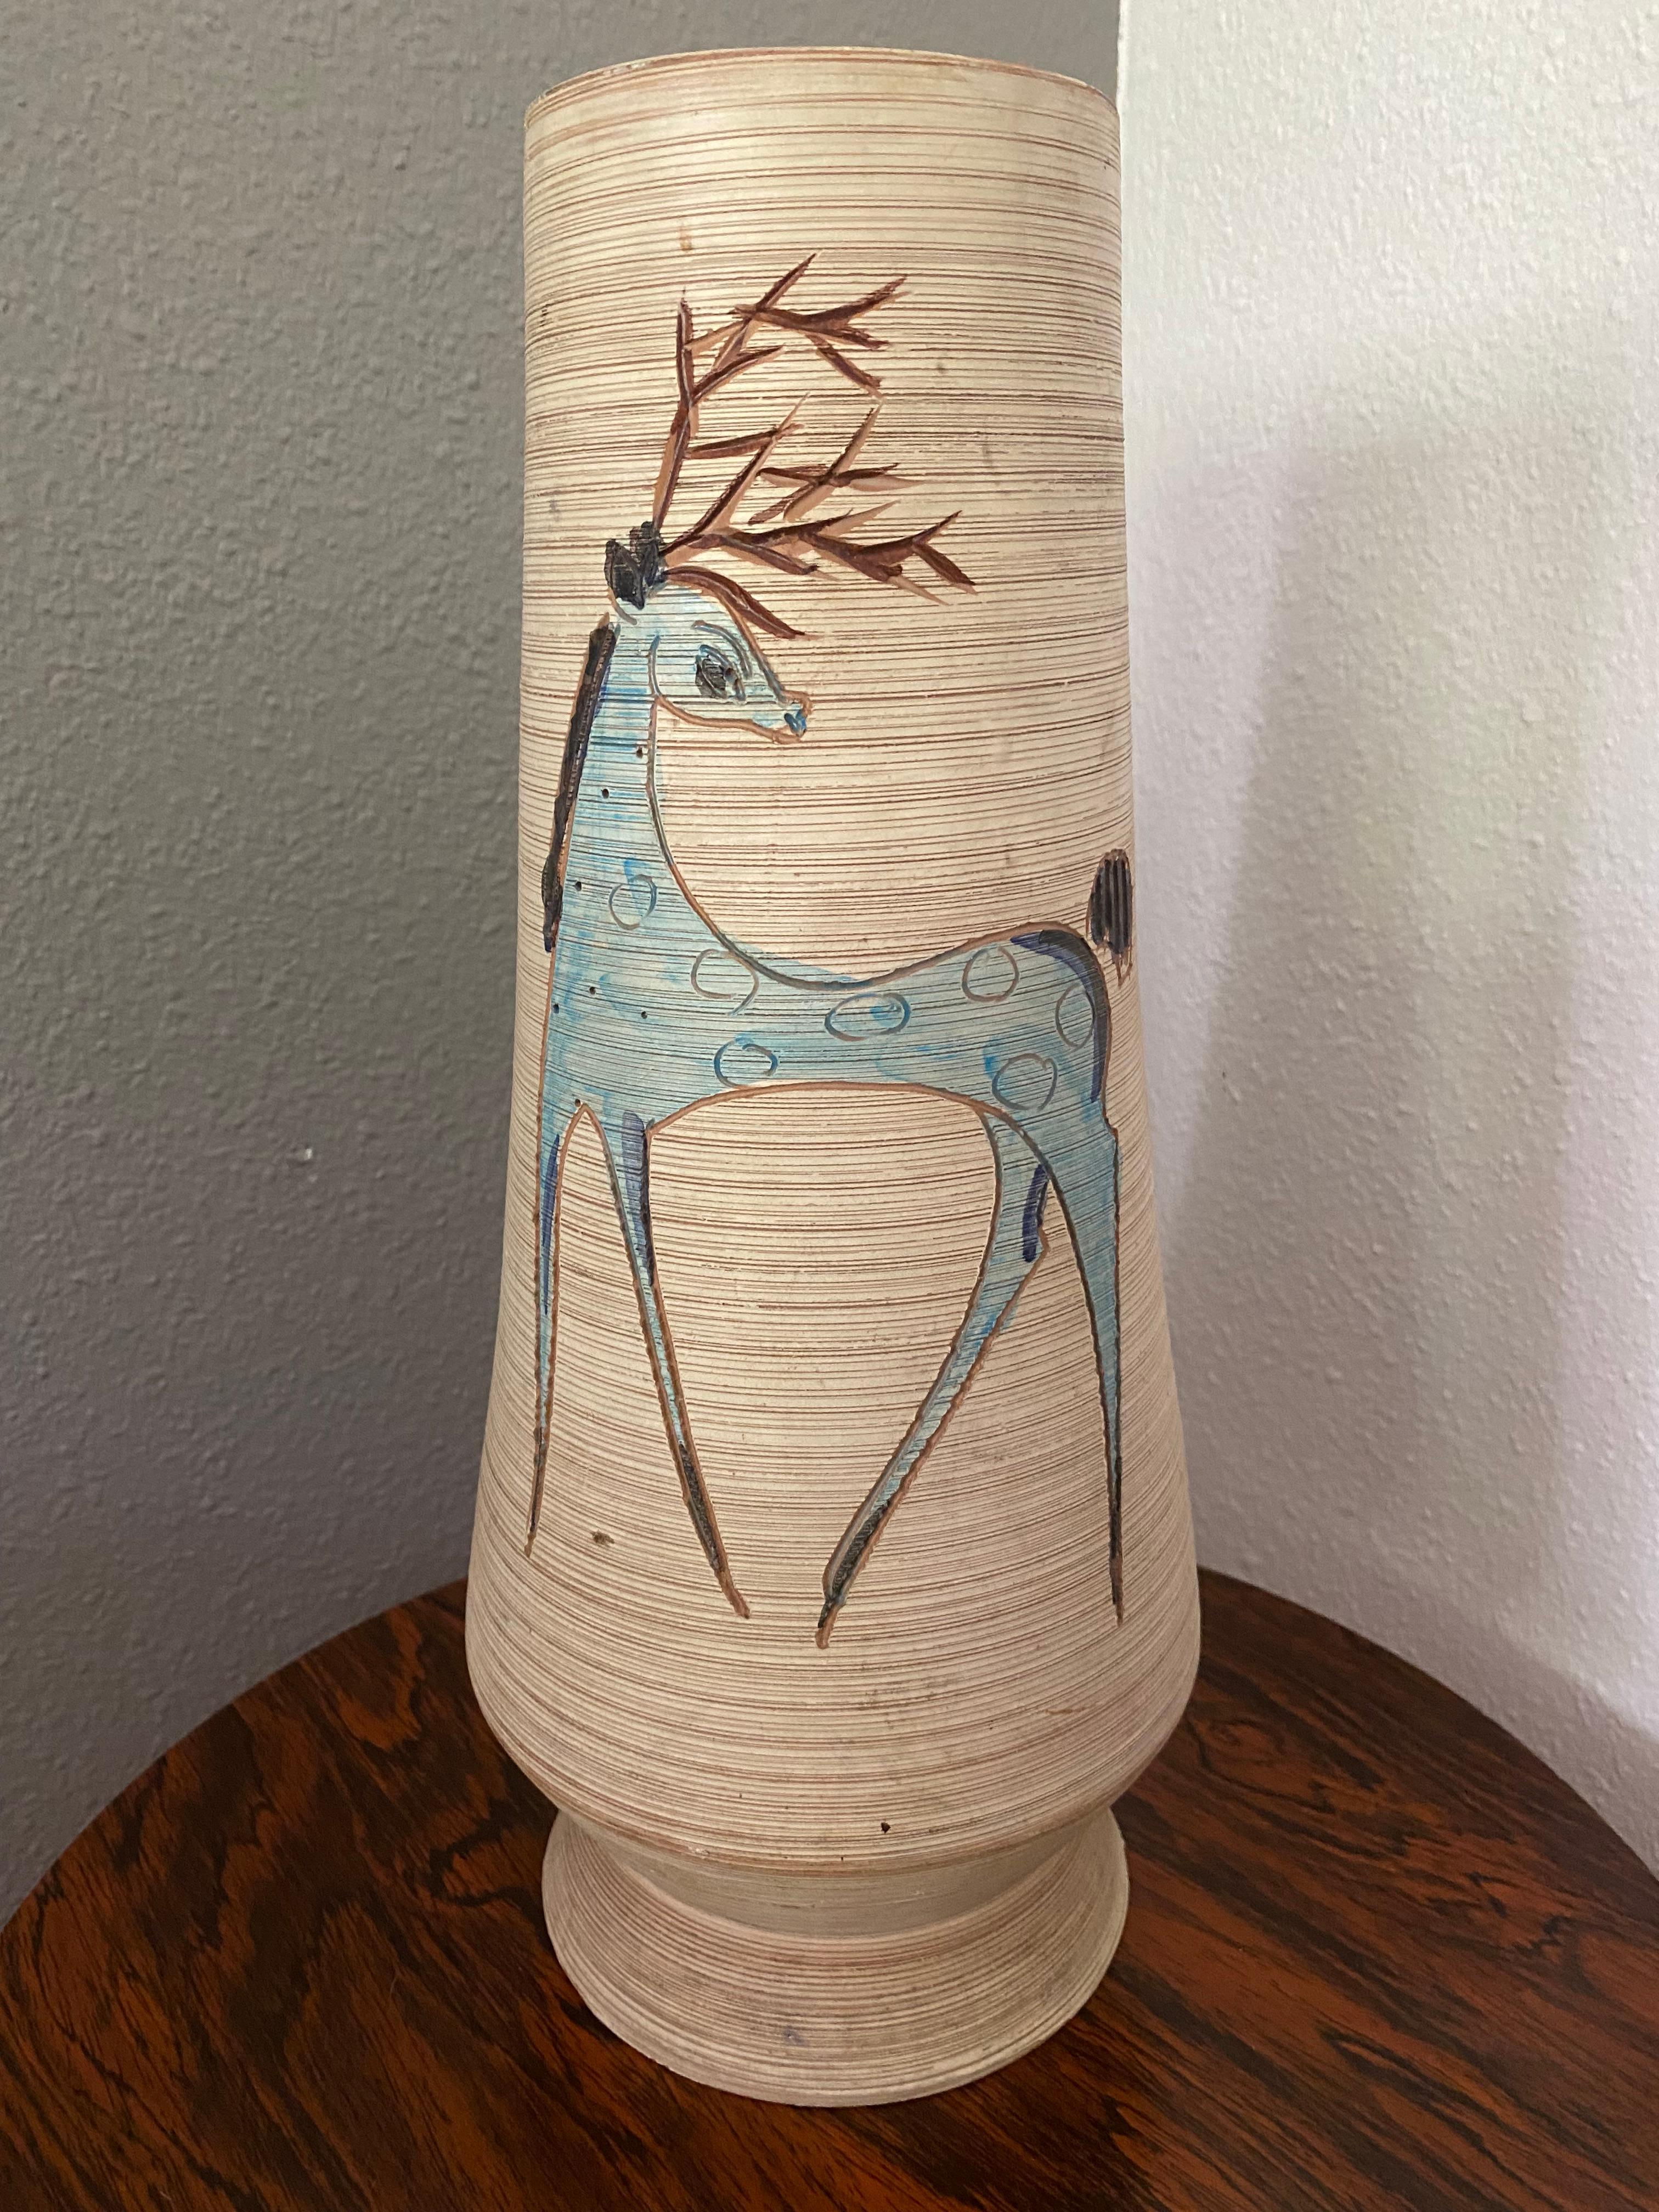 Stunning and vibrant, 38cm high, vase with sgrafitto and hand-painted colored glossy pattern of a blue deer.. On the base is painted Italy V.D. 14.

Fratelli Fanciullacci Pottery: during the first half of the 20th century the firm slowly branched